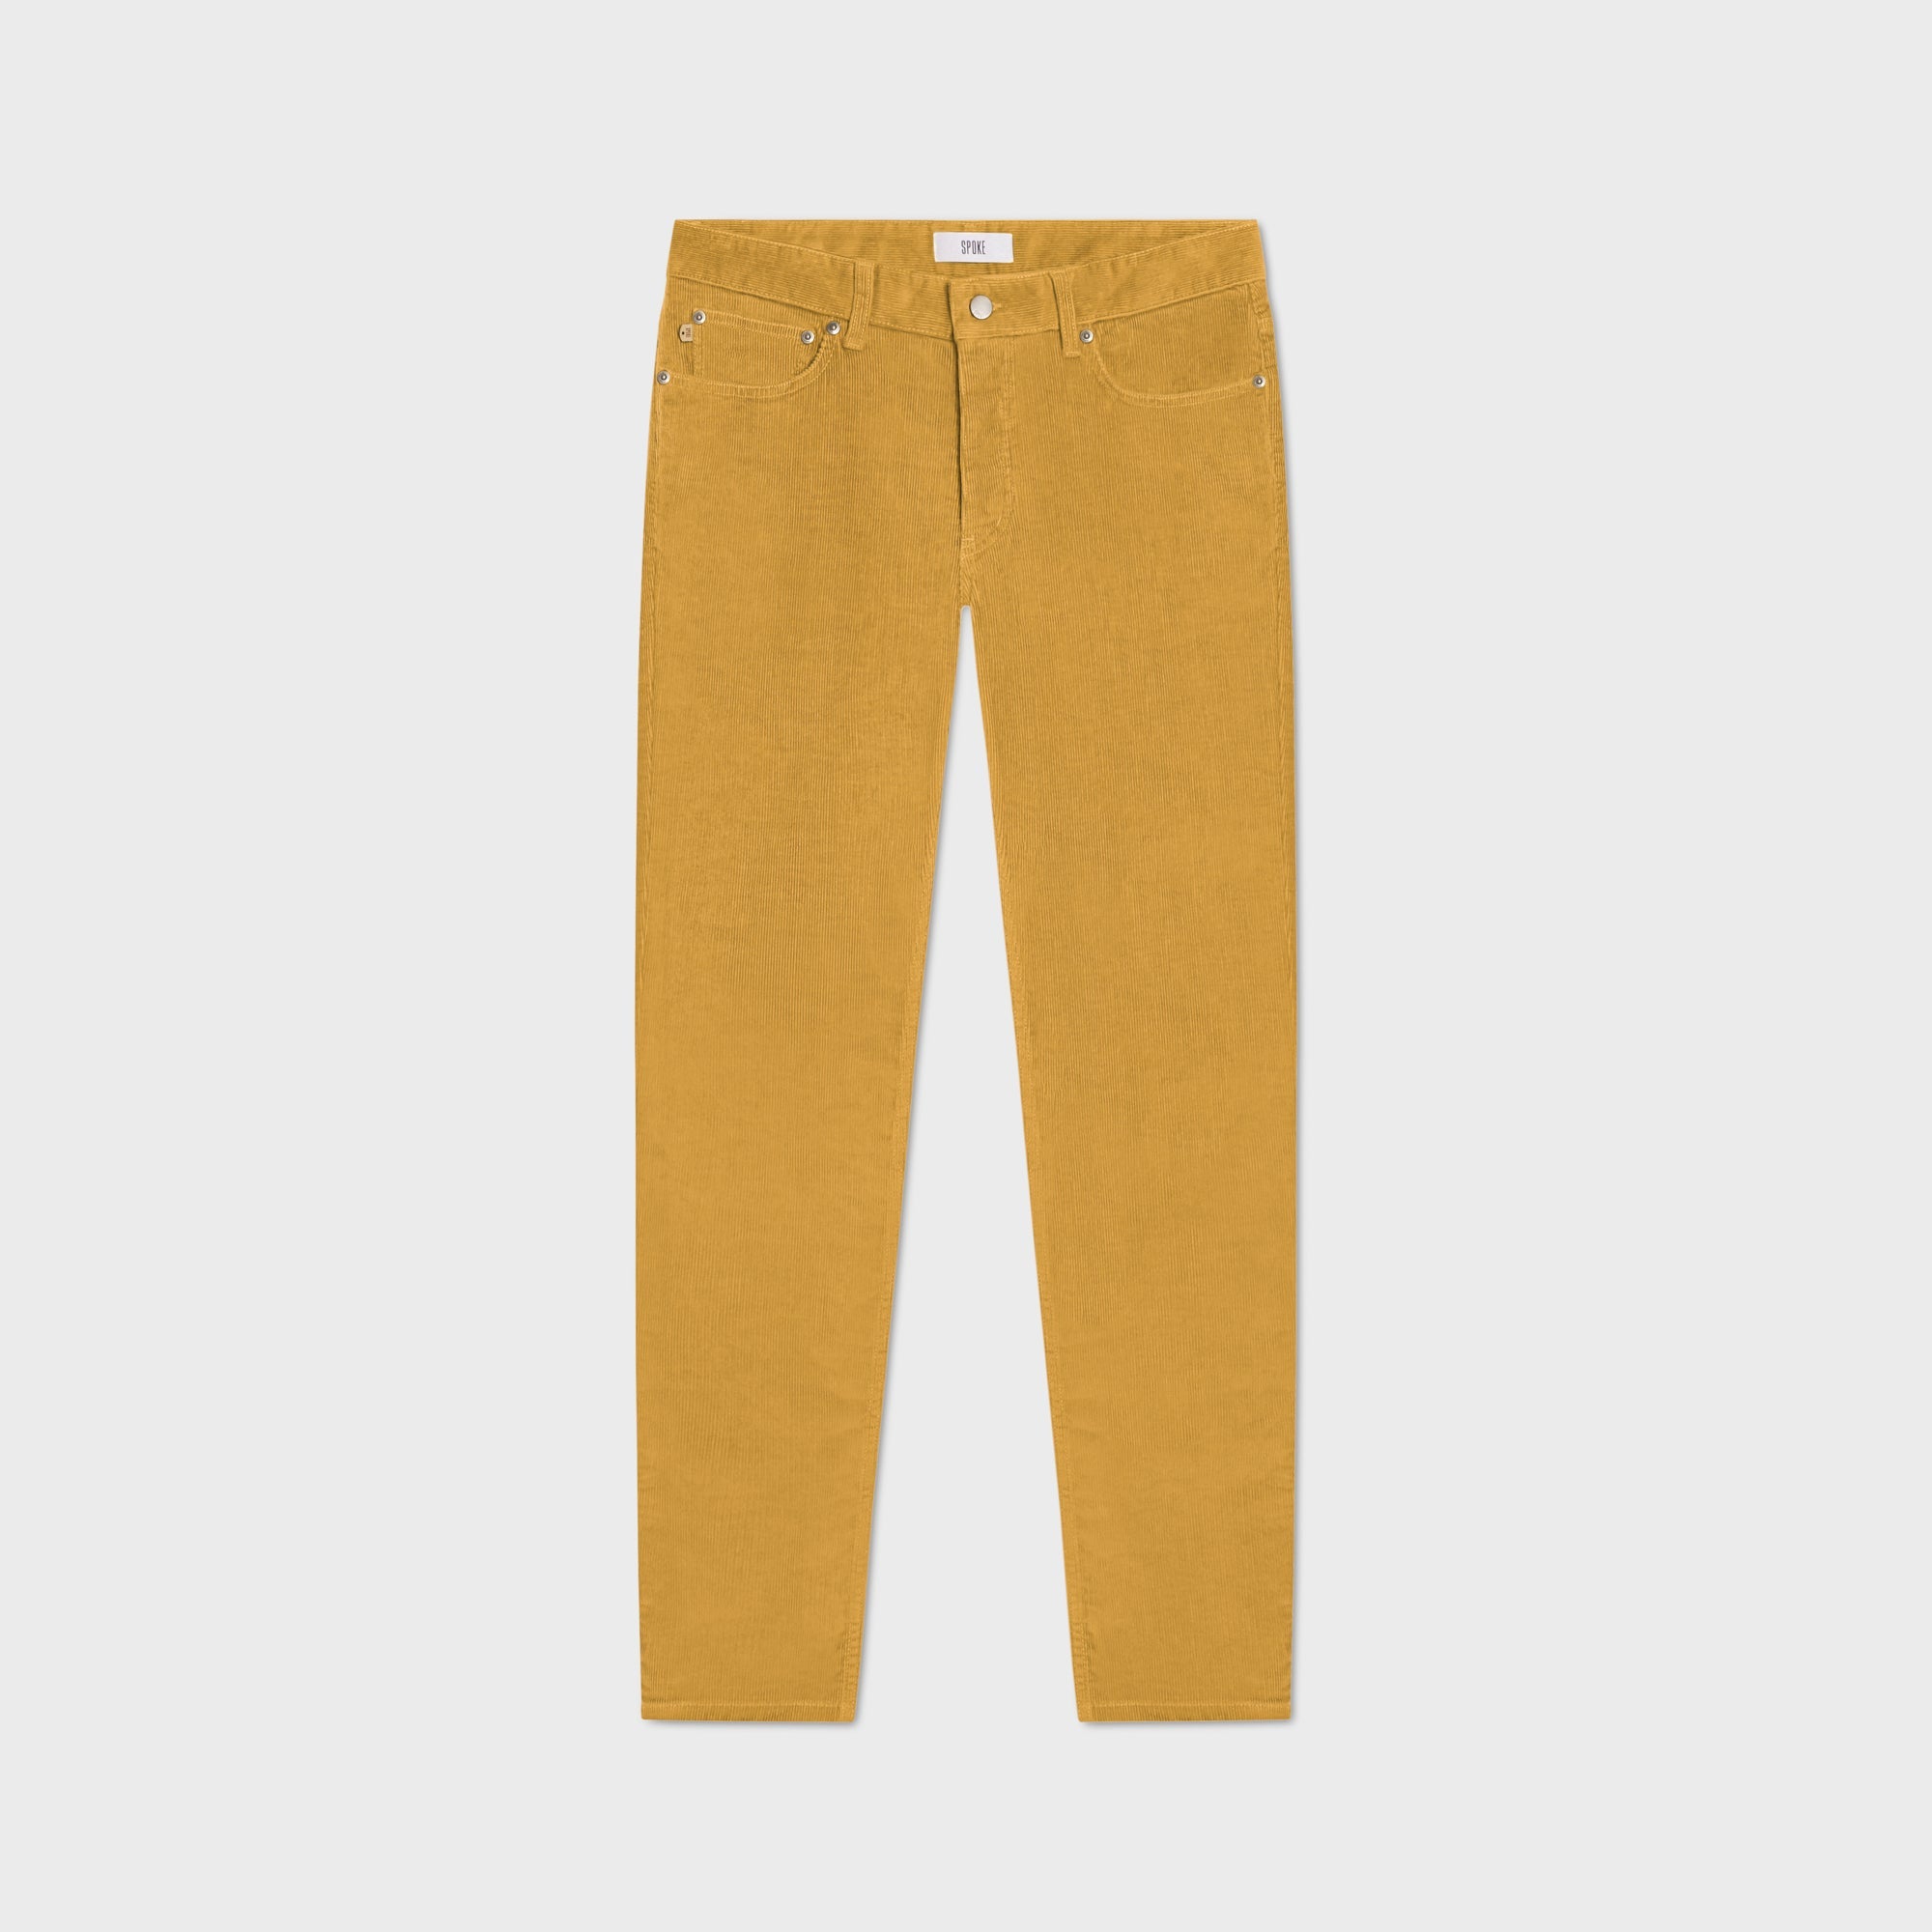 Buy Mustard Yellow Track Pants for Men by Aesthetic Bodies Online | Ajio.com